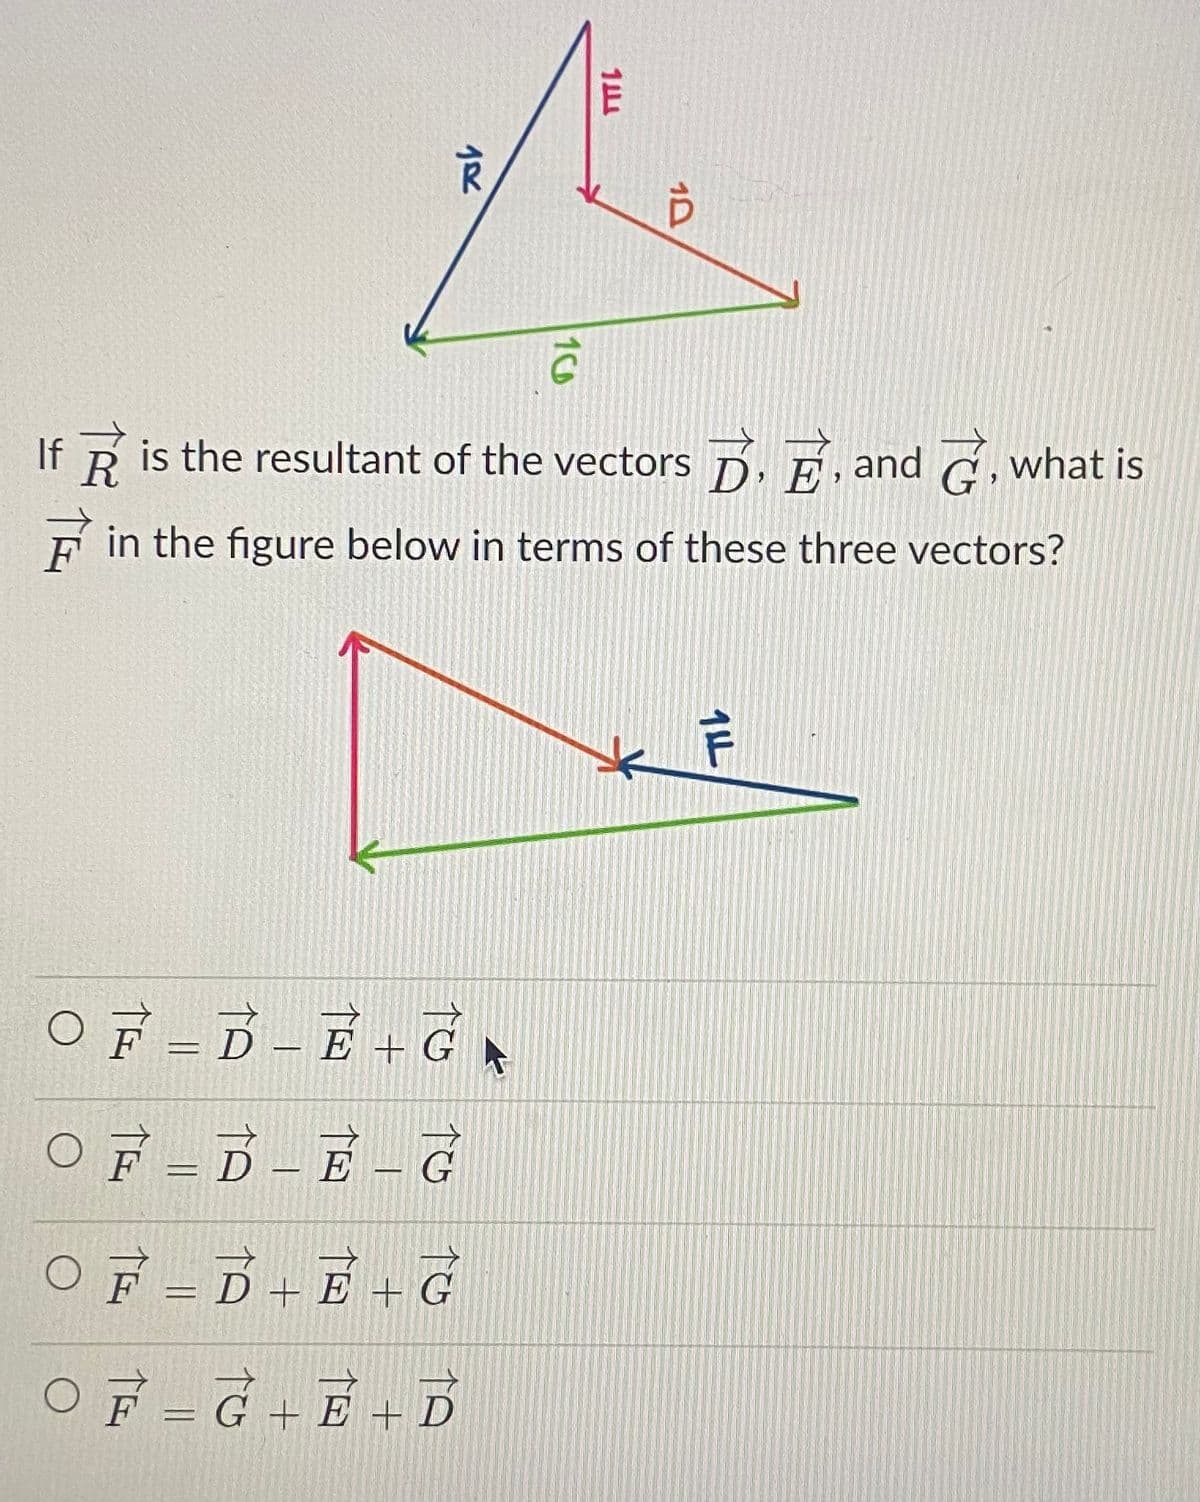 If R is the resultant of the vectors D, F, and G,what is
E in the figure below in terms of these three vectors?
OF-B-E+G
OF -D-E -G
OF =D+ E + G
OF-G+E +D
%3D
1D
1C0
